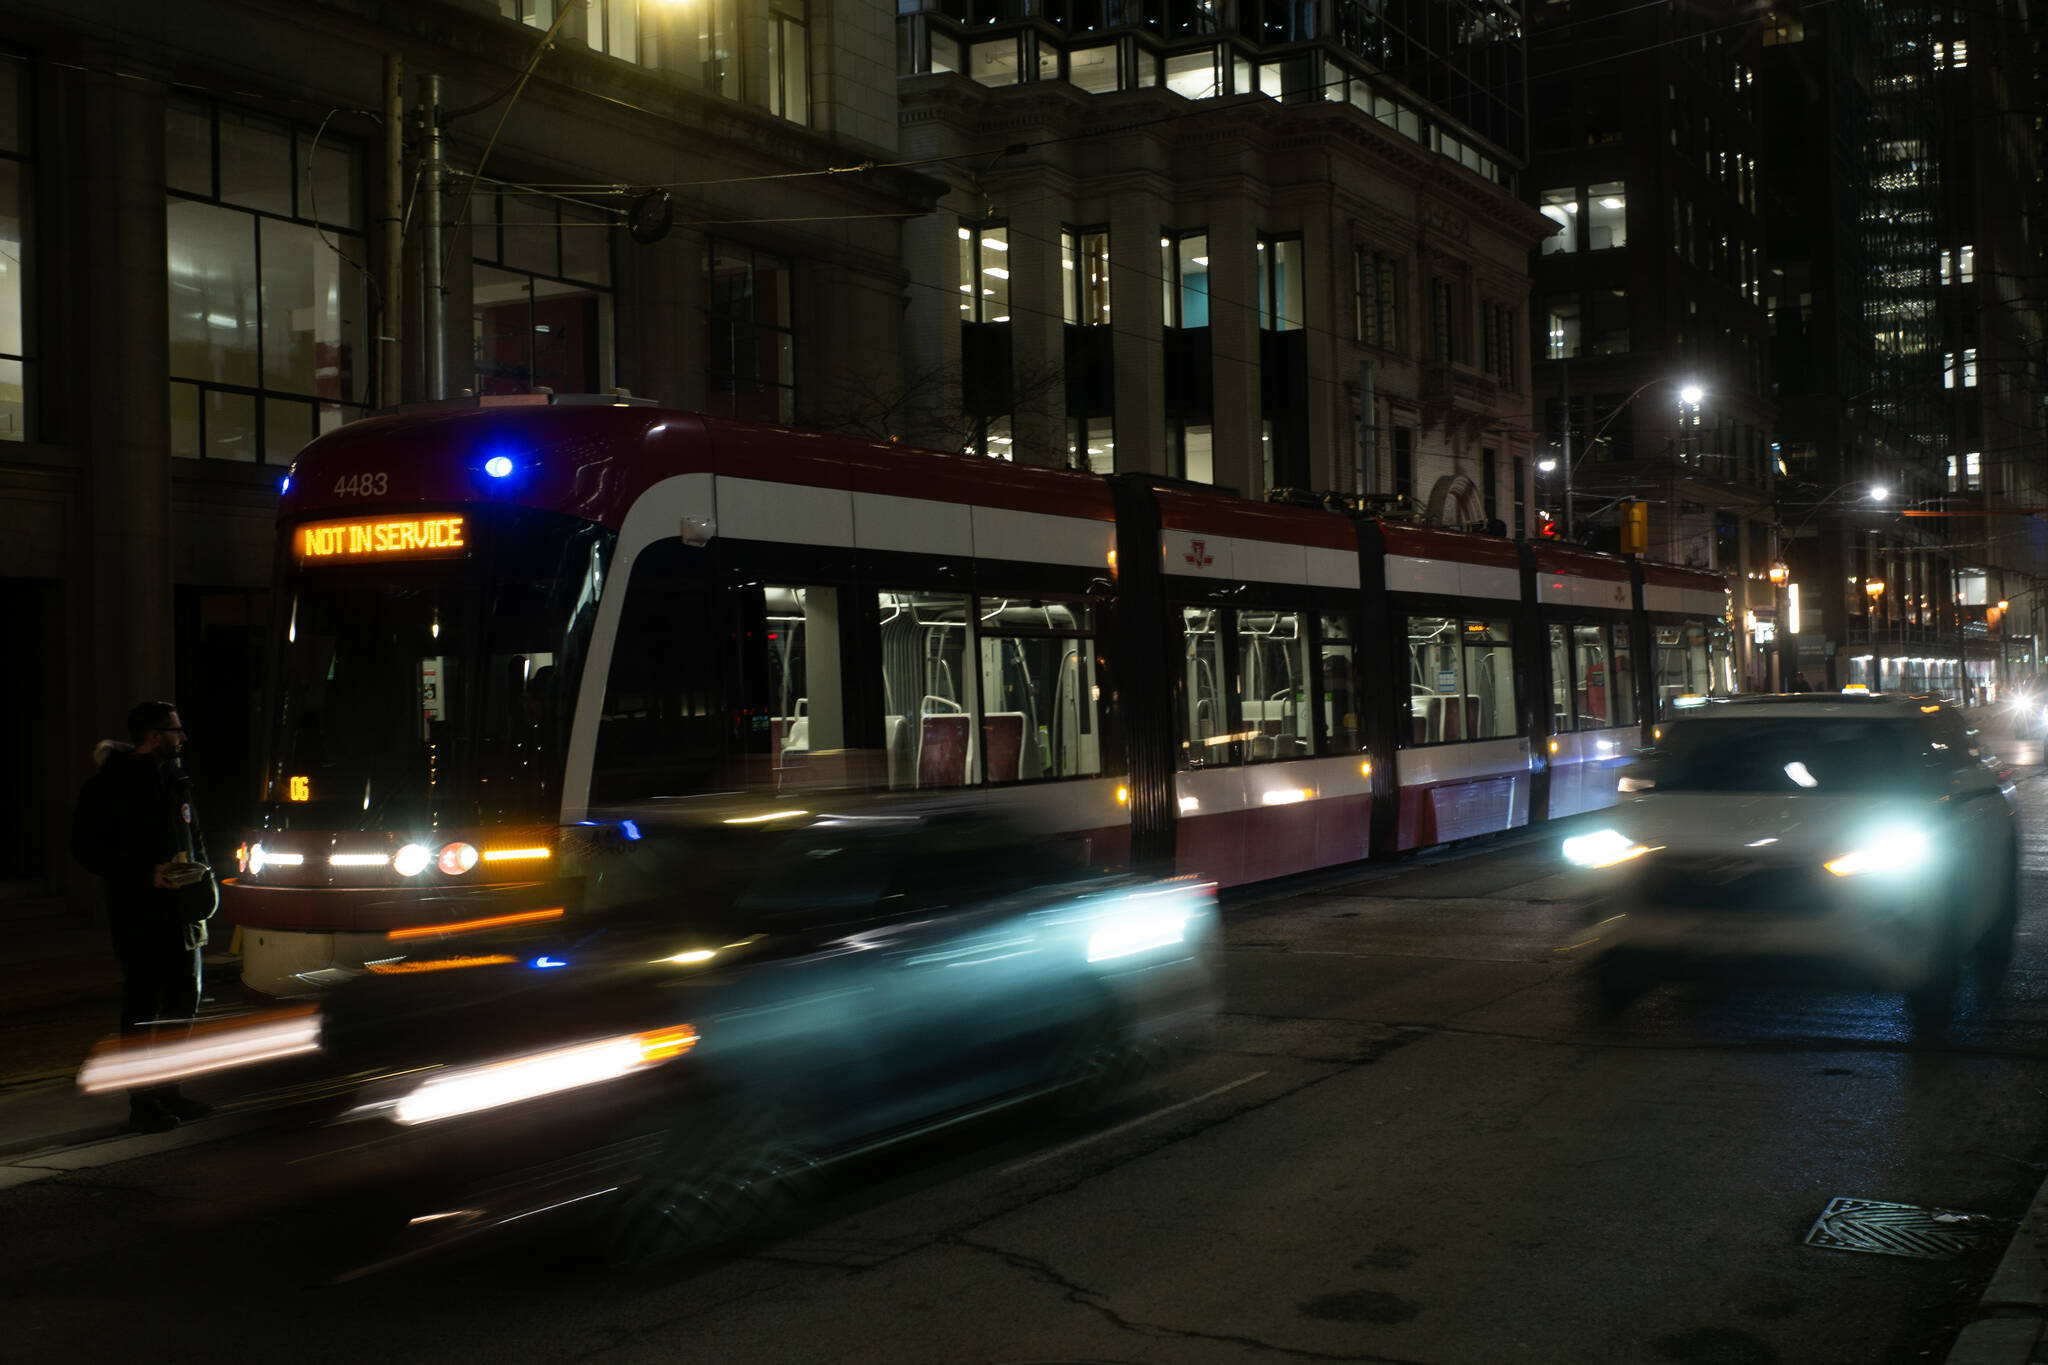 A Toronto Transit Commission streetcar is shown in downtown Toronto Tuesday, Jan. 24, 2023. THE CANADIAN PRESS/Graeme Roy